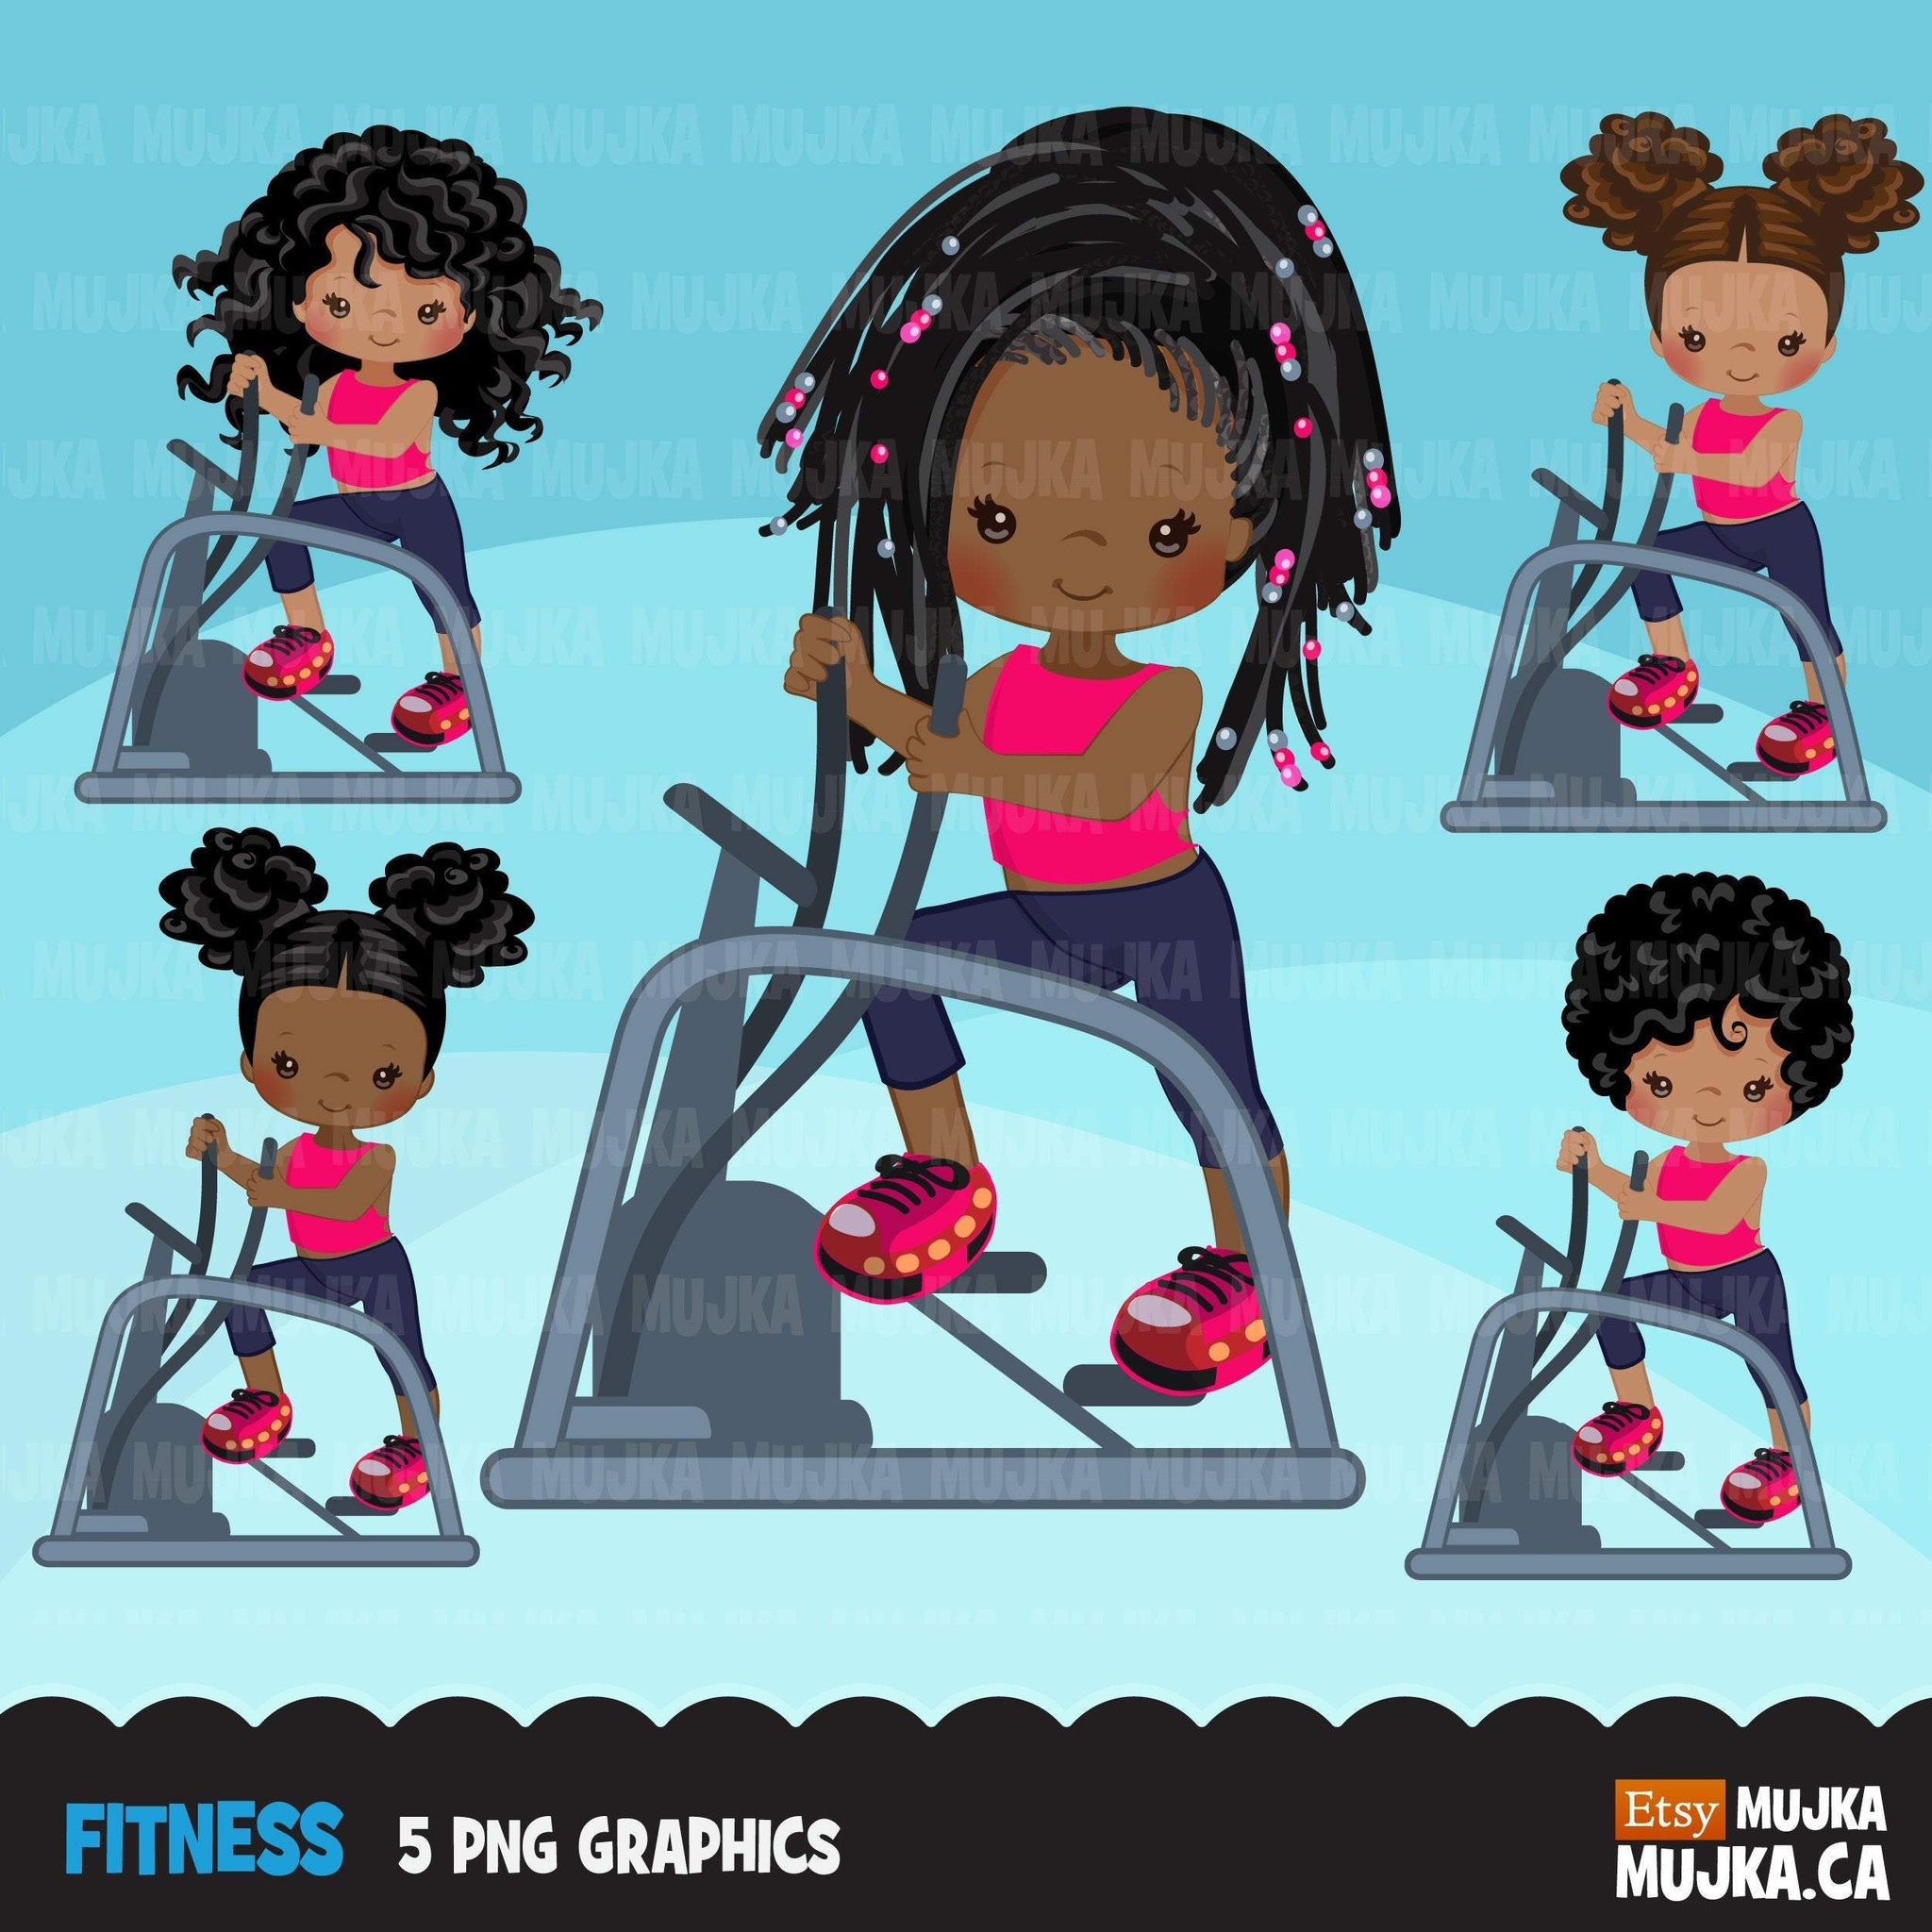 Fitness clipart healthy lifestyle, yoga, workout, gym graphics, commercial use clip art, step machine black girls